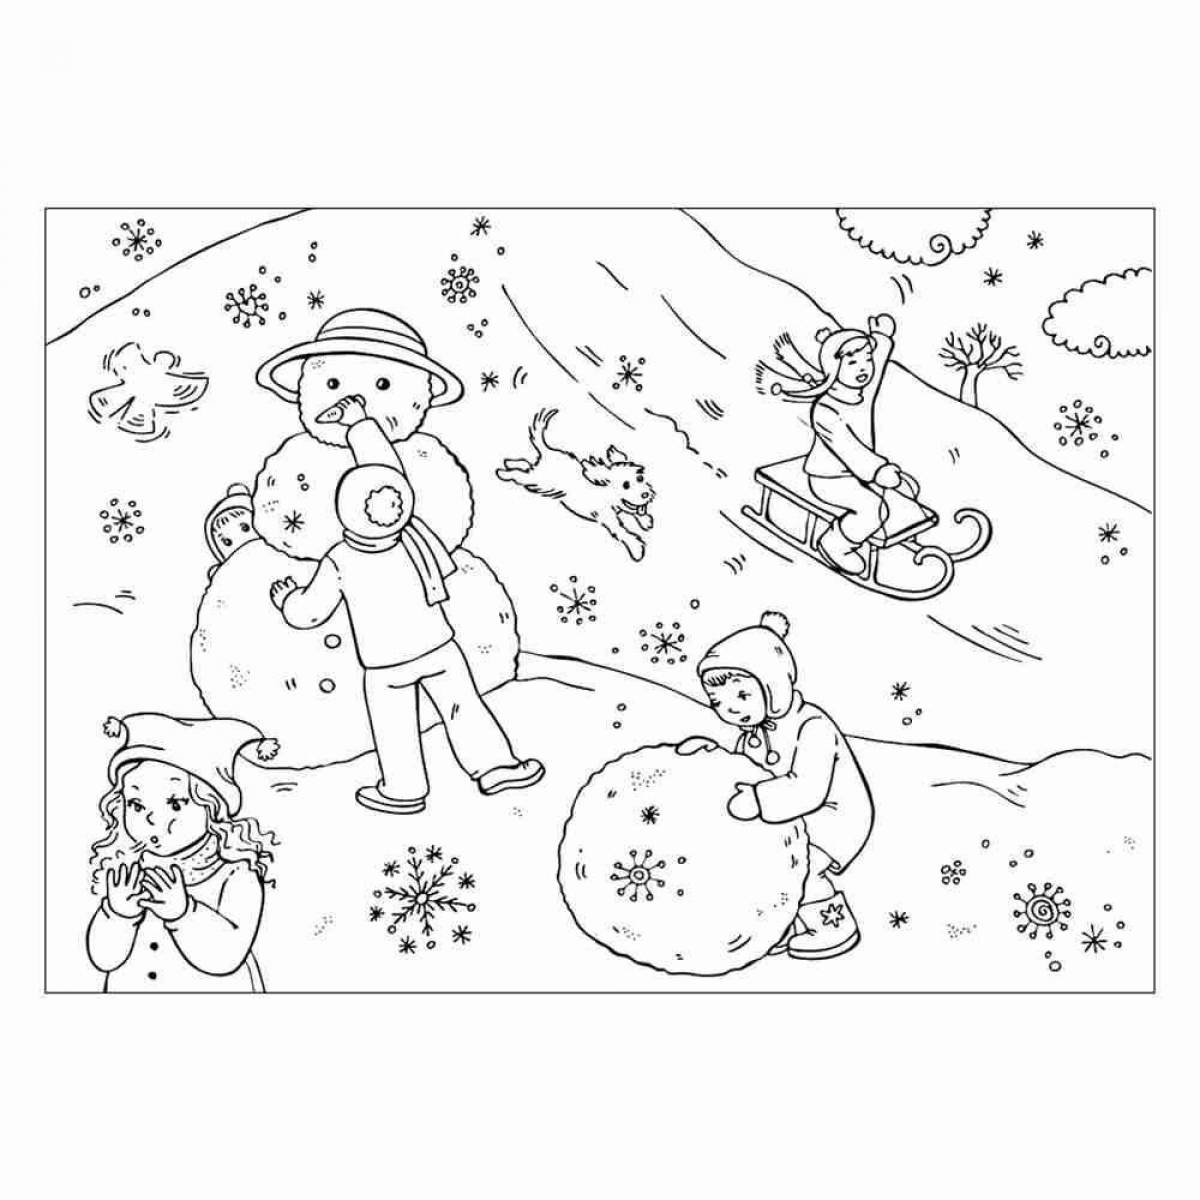 Playful winter games coloring page